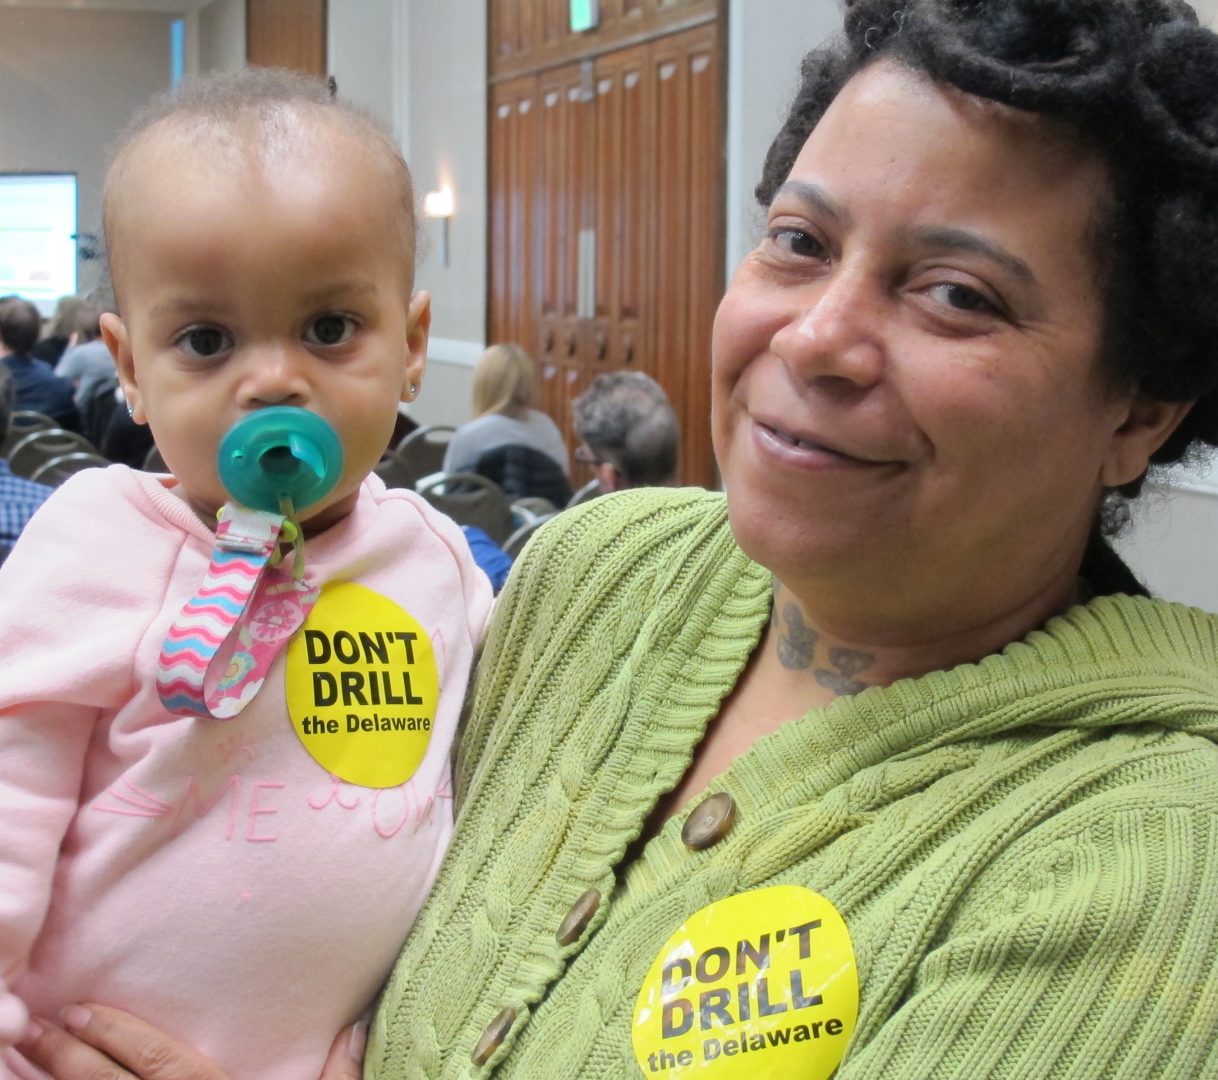 Cayleigh Dorsey was the youngest to stand by the podium at the DRBC hearing. She’s one year old, and was held by her grandmother Alicia Dorsey, from South Philadelphia. 